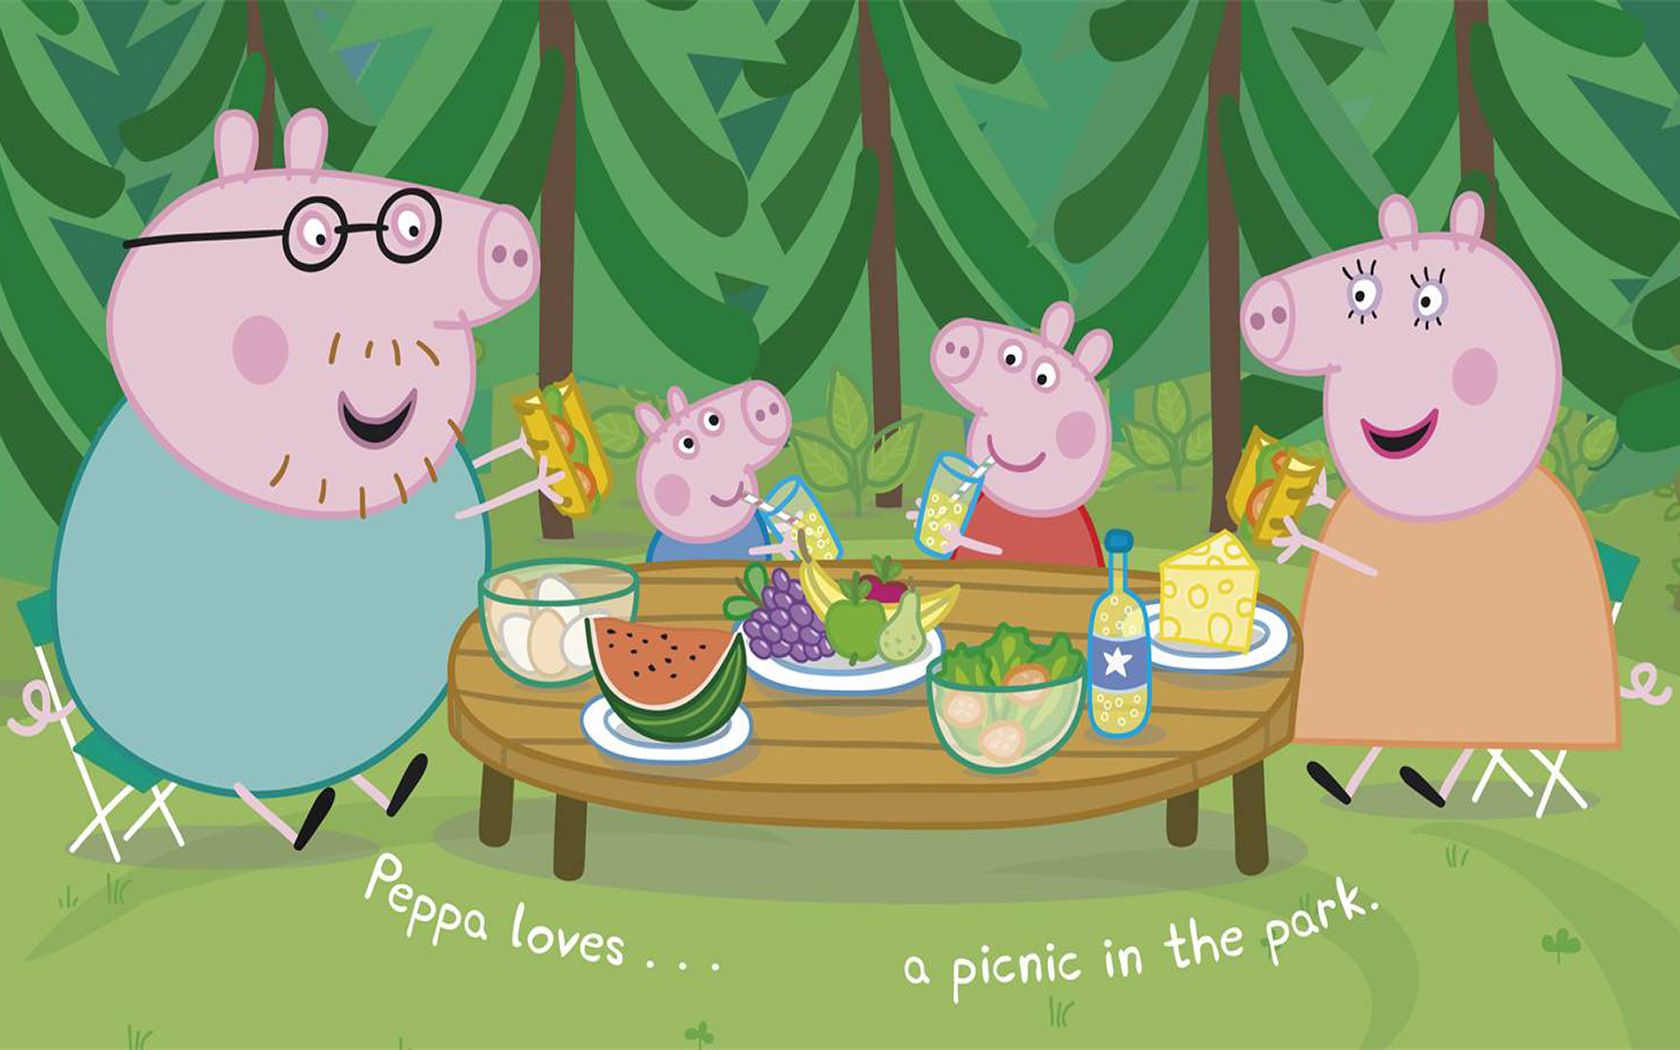 Download Peppa Pig wallpaper for mobile phone, free Peppa Pig HD picture